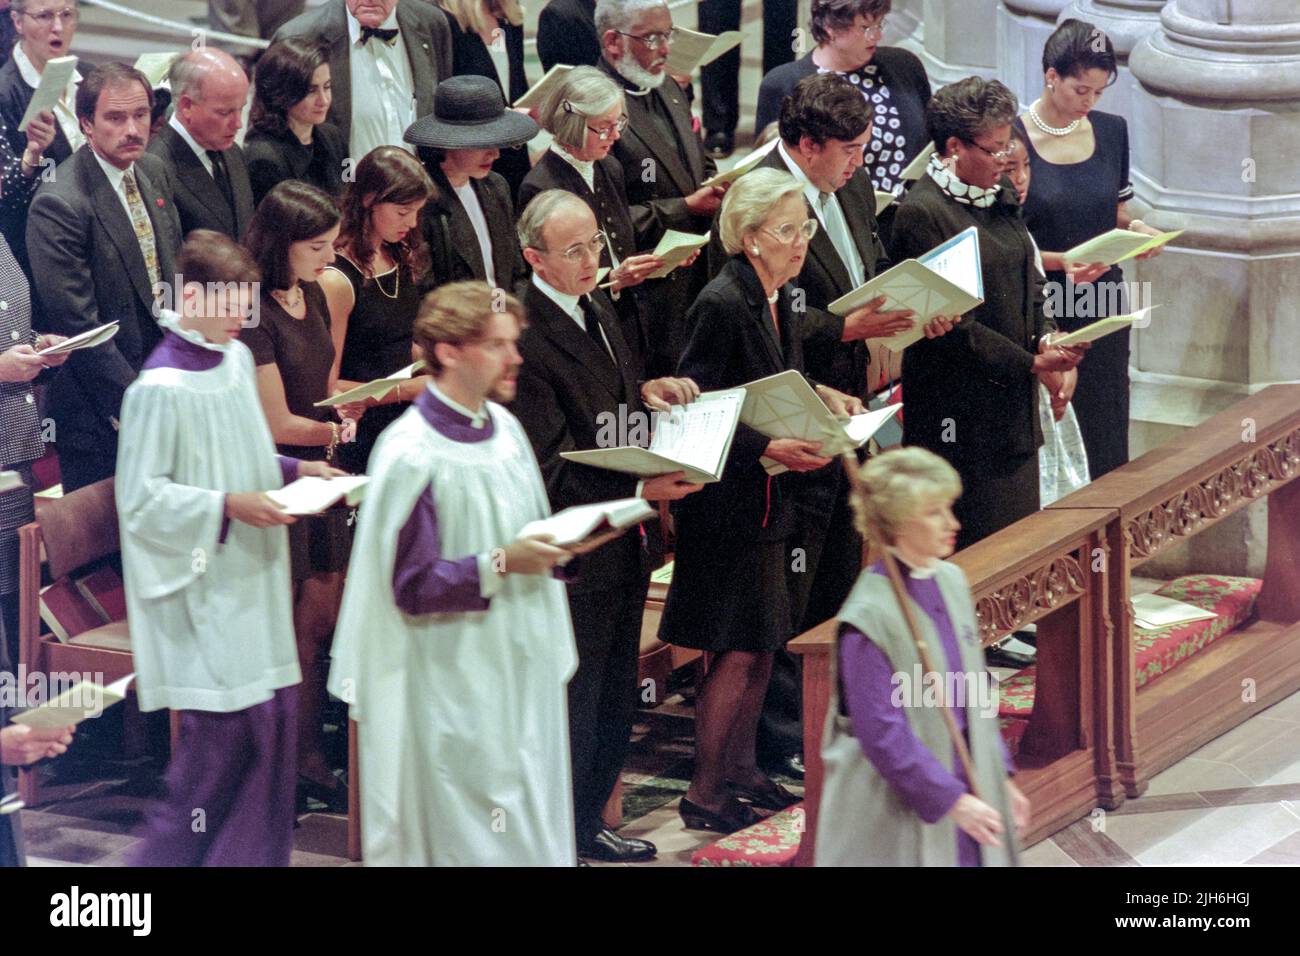 British Ambassador to the U.S. Sir John Kerr, center, joins in singing Hymn 608 during a memorial and prayer service to Diana, the Princess of Wales, on the occasion of her death at the Washington National Cathedral, September 6, 1997, in Washington, D.C. Standing next to Kerr are Chairwoman of the Washington Post Katharine Graham and U.S. ambassador to the United Nations Bill Richardson. Stock Photo